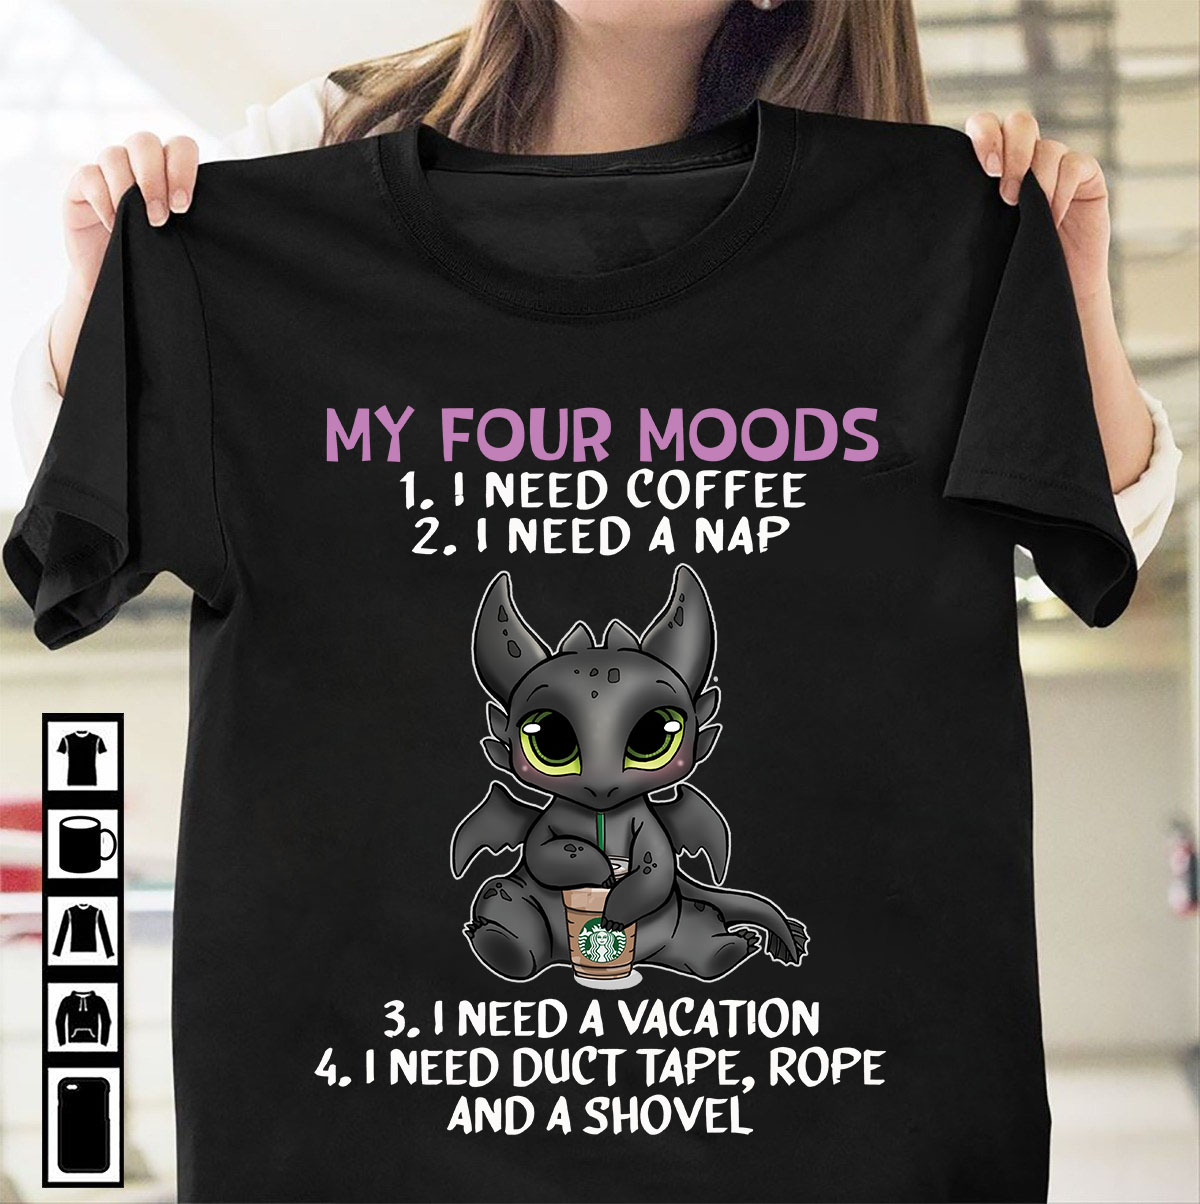 My four moods - I need coffee, neep a nap, need a vacation, need duct tape, rope and a shovel - Night furry dragon